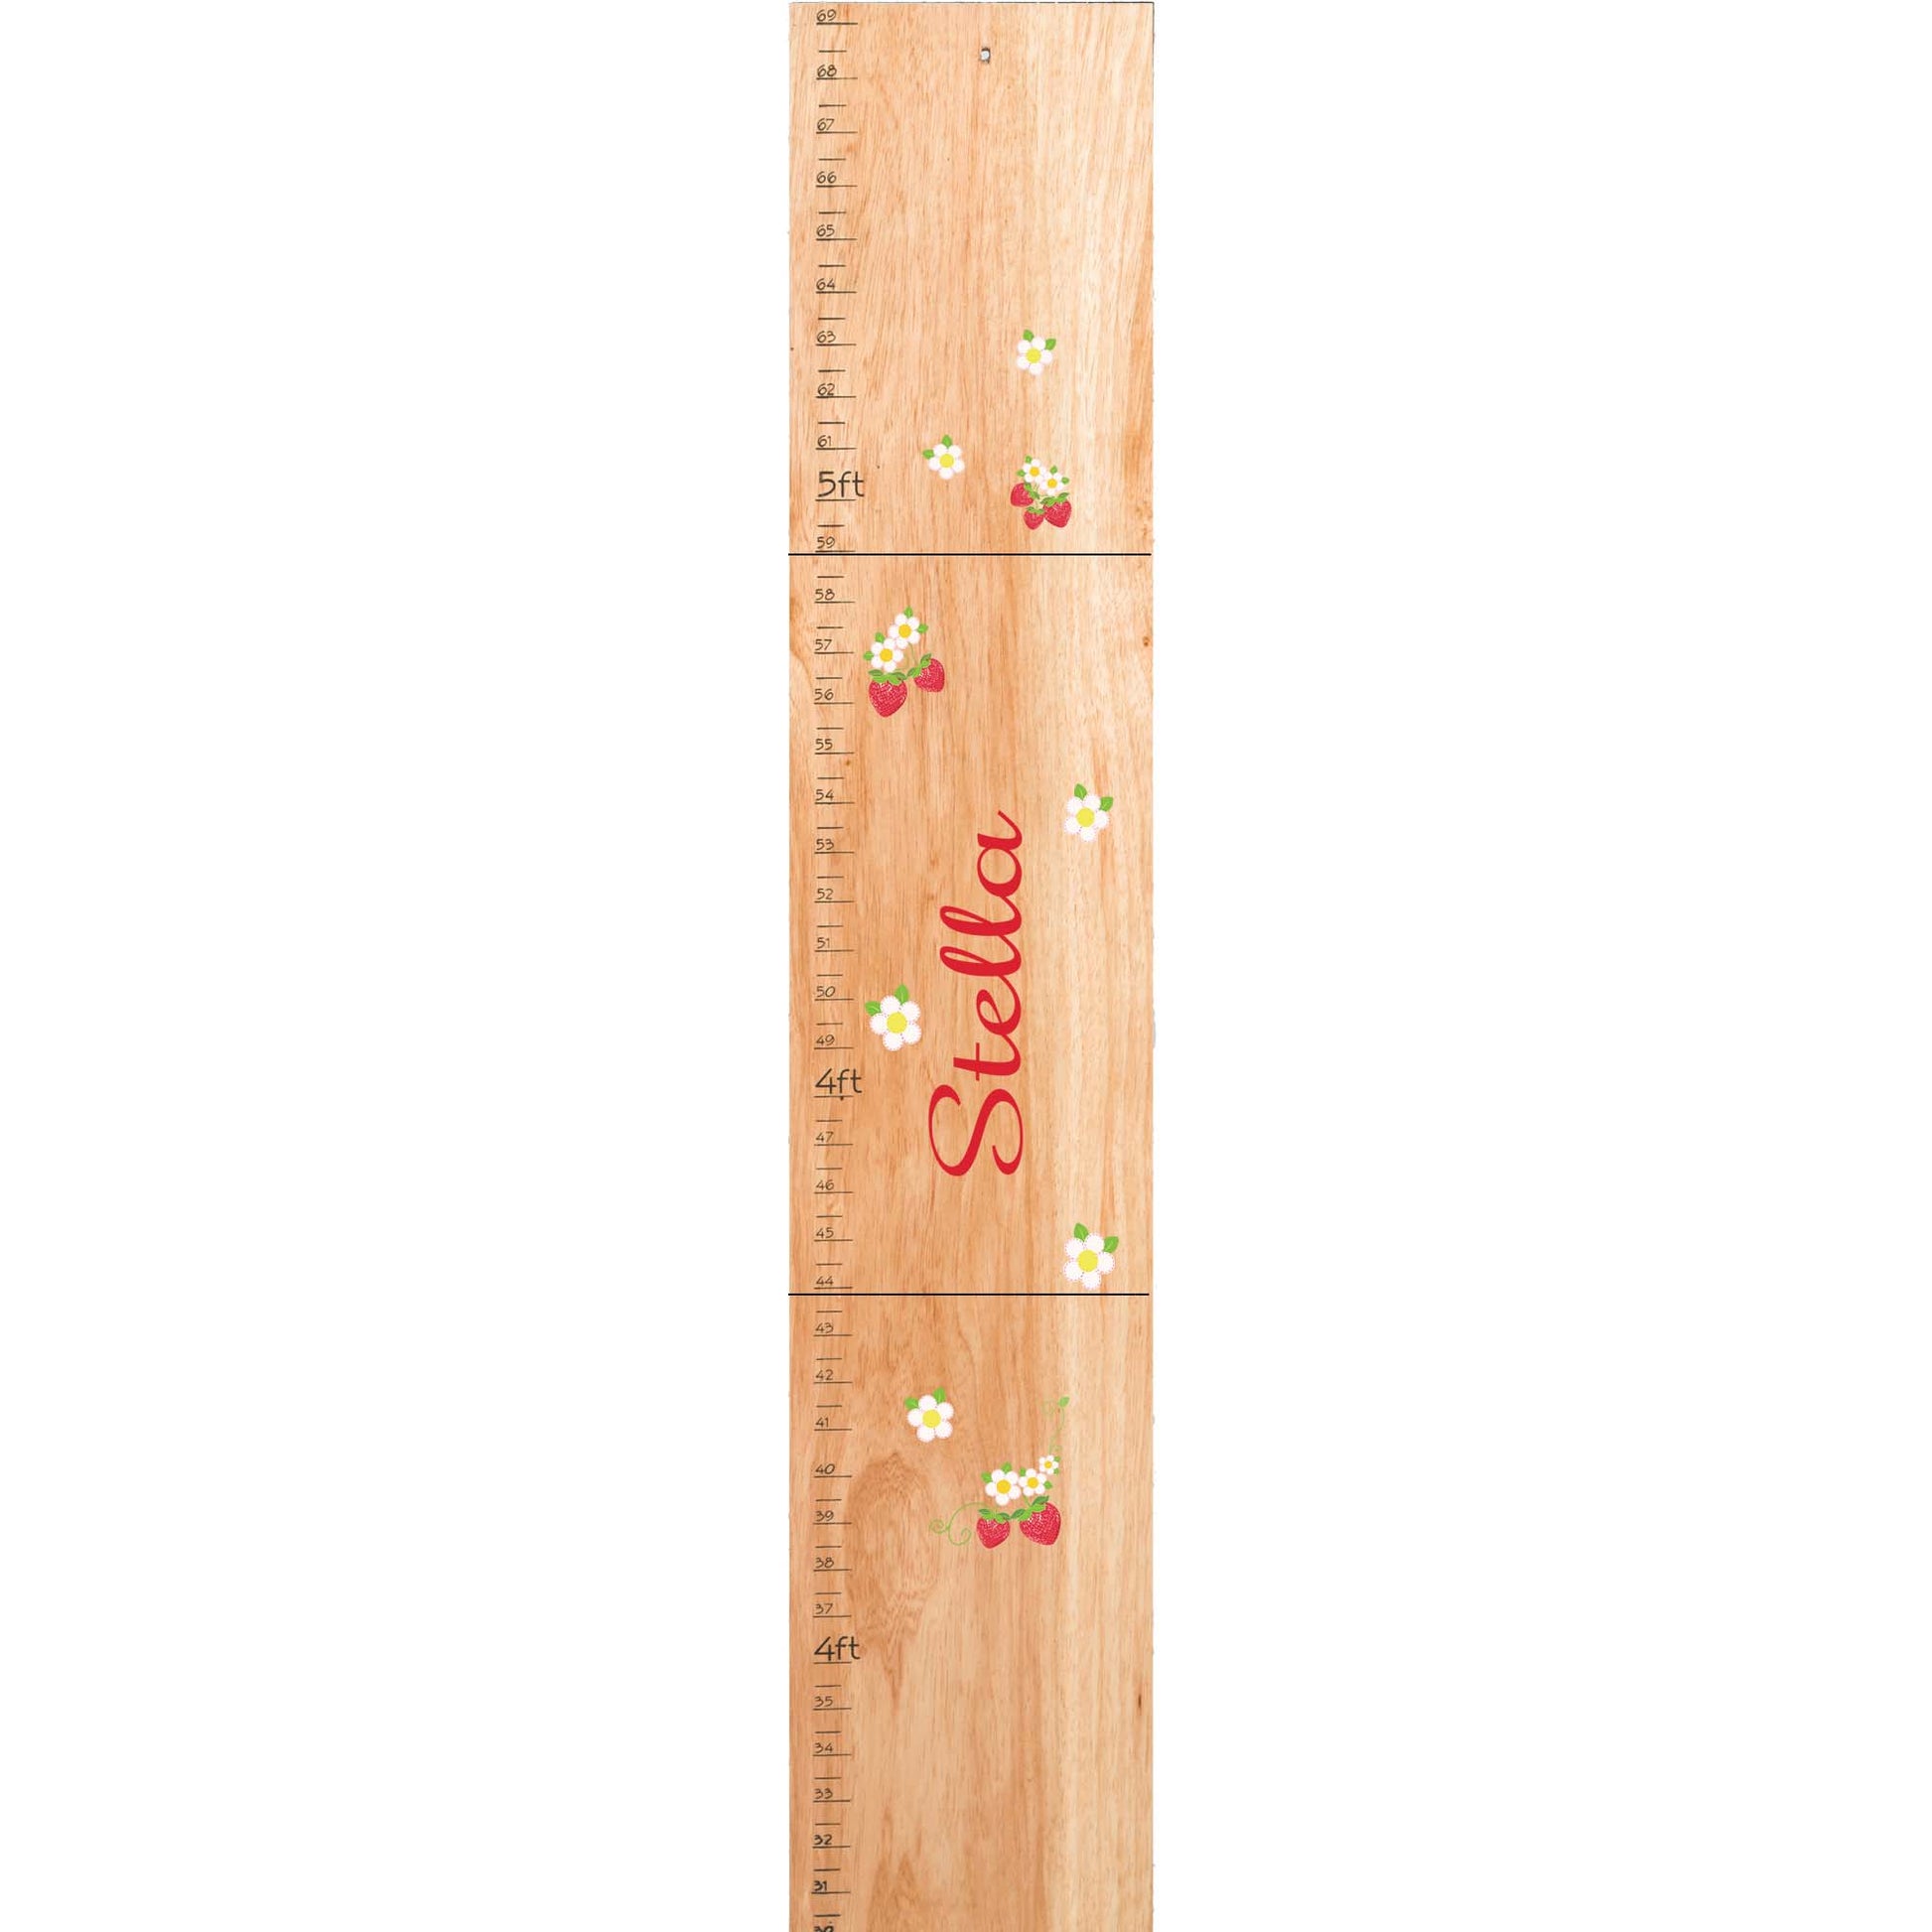 Personalized Natural Growth Chart With Strawberries Design